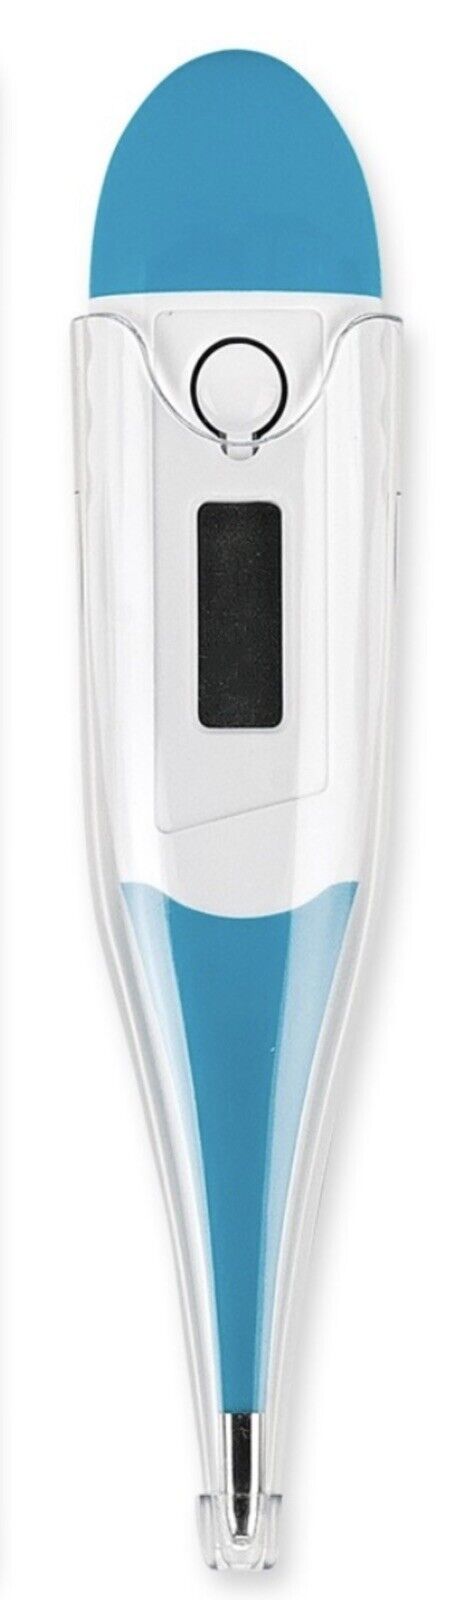 Primary image for Playtex Baby Flexible Digital Thermometer with Case New Blue